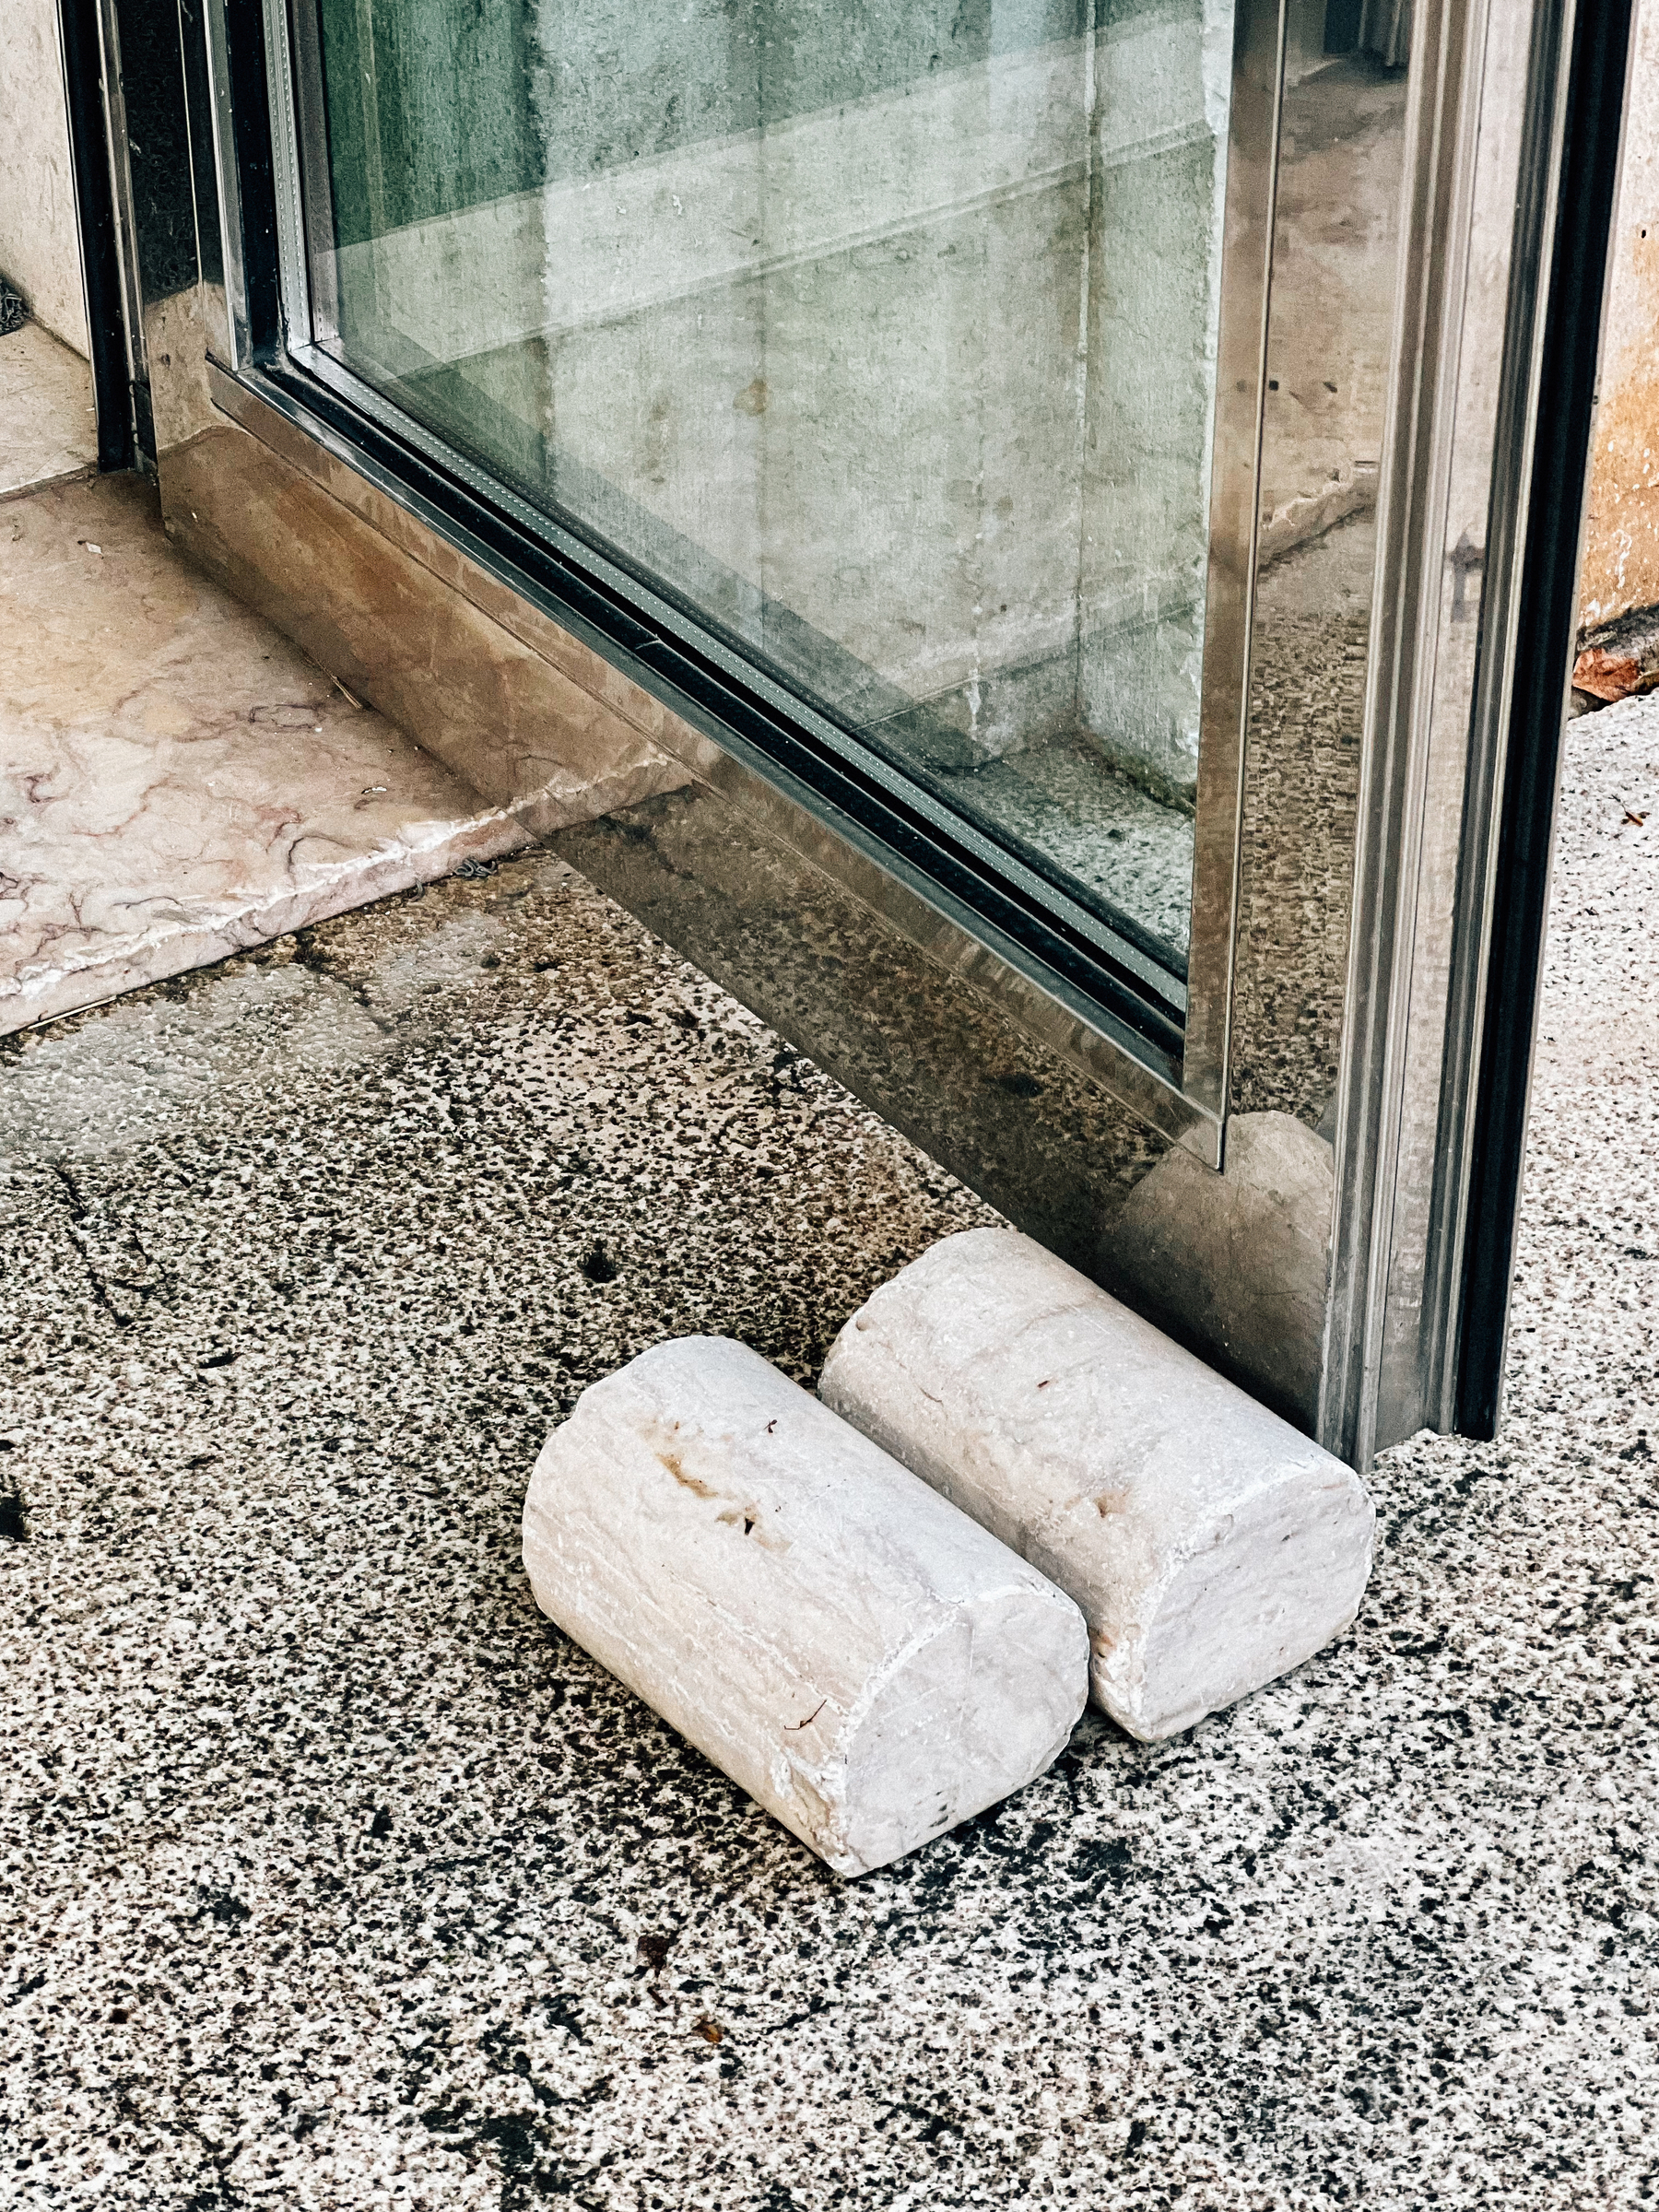 Two stone doorstops placed in front of a glass door on a speckled floor surface.